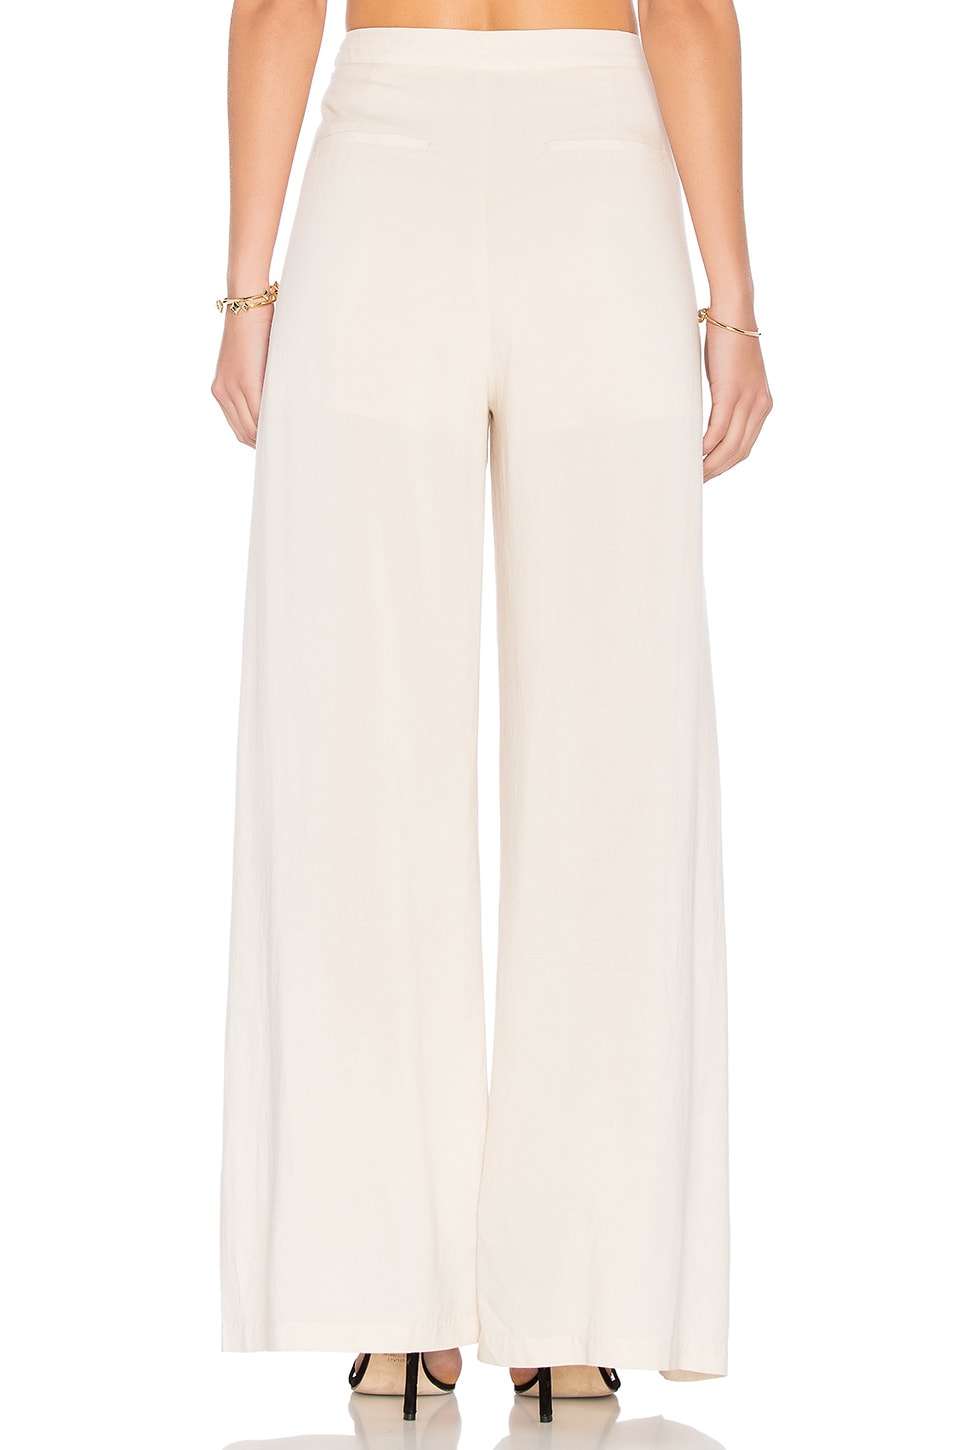 ENDLESS ROSE Pleated Pants in Ivory | ModeSens